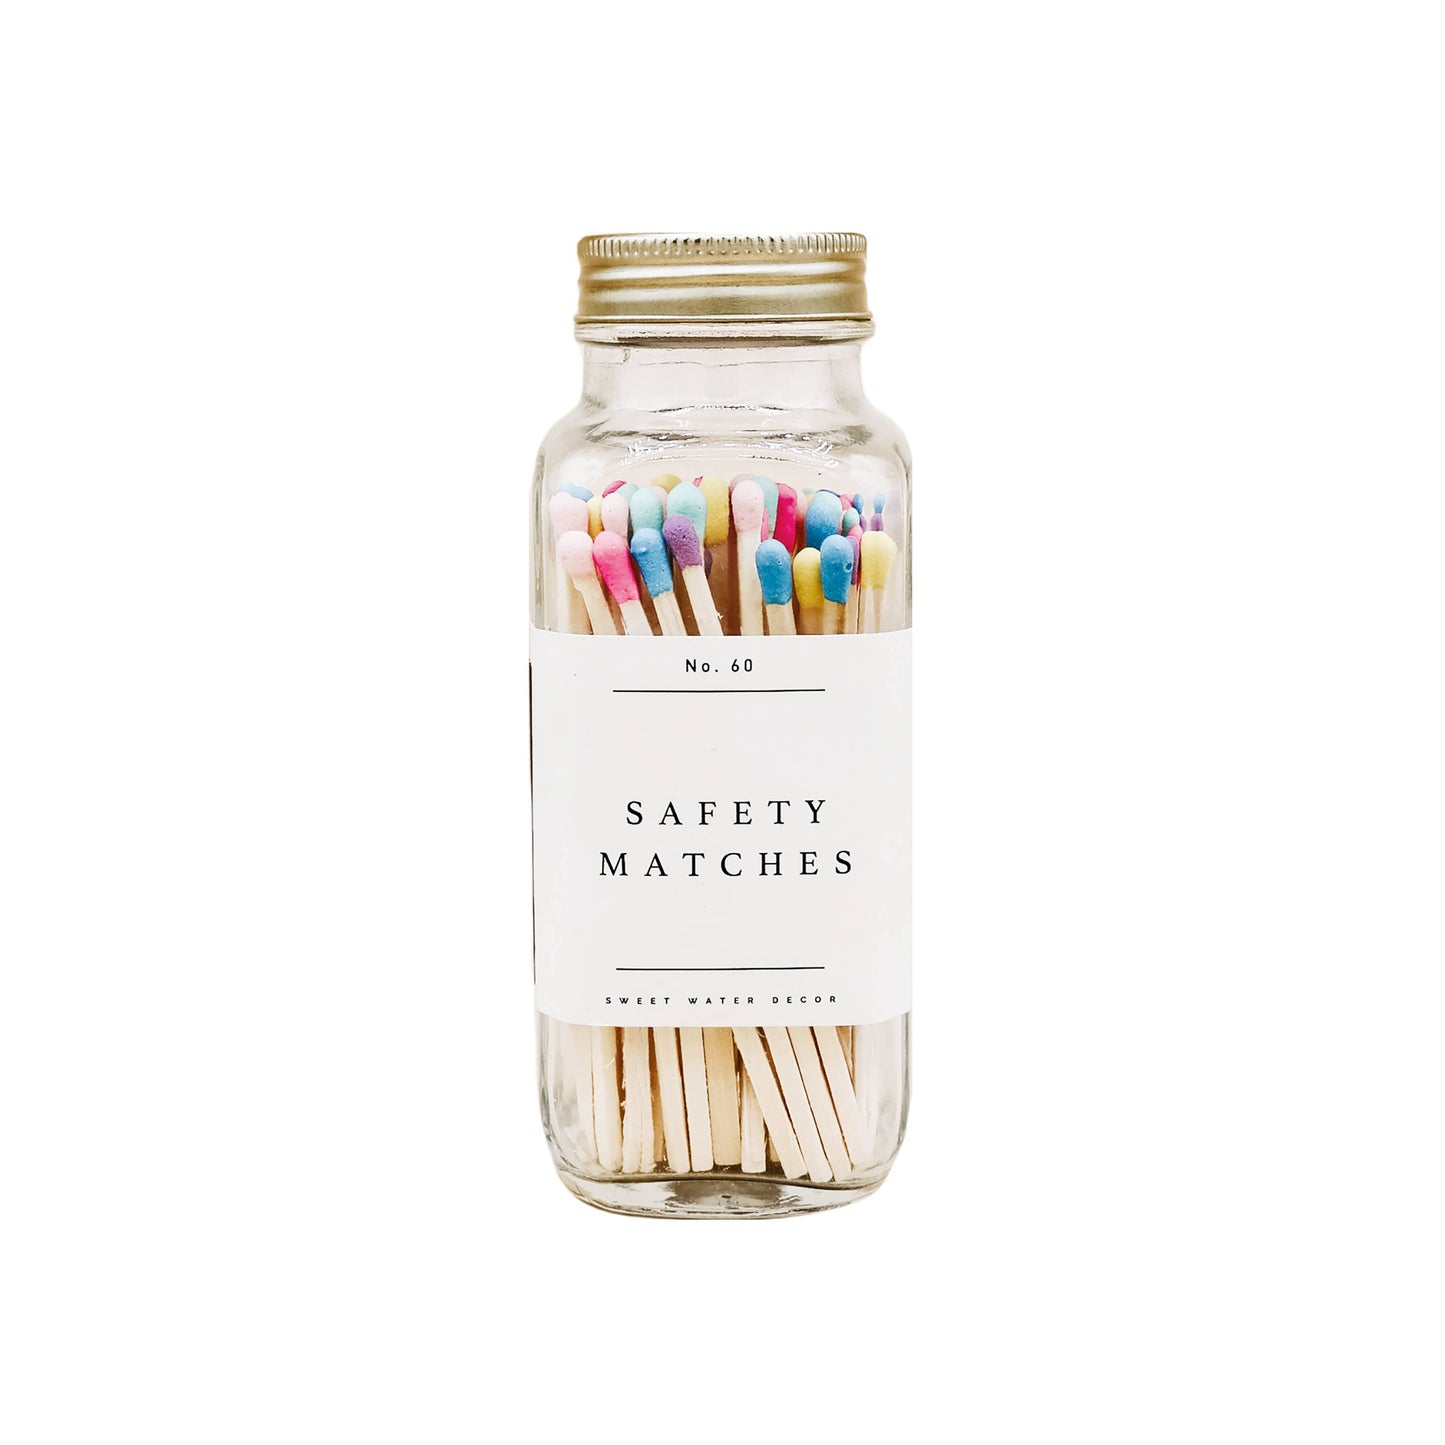 Safety Matches - Multicolor Rainbow - 60 Count, 3.75"